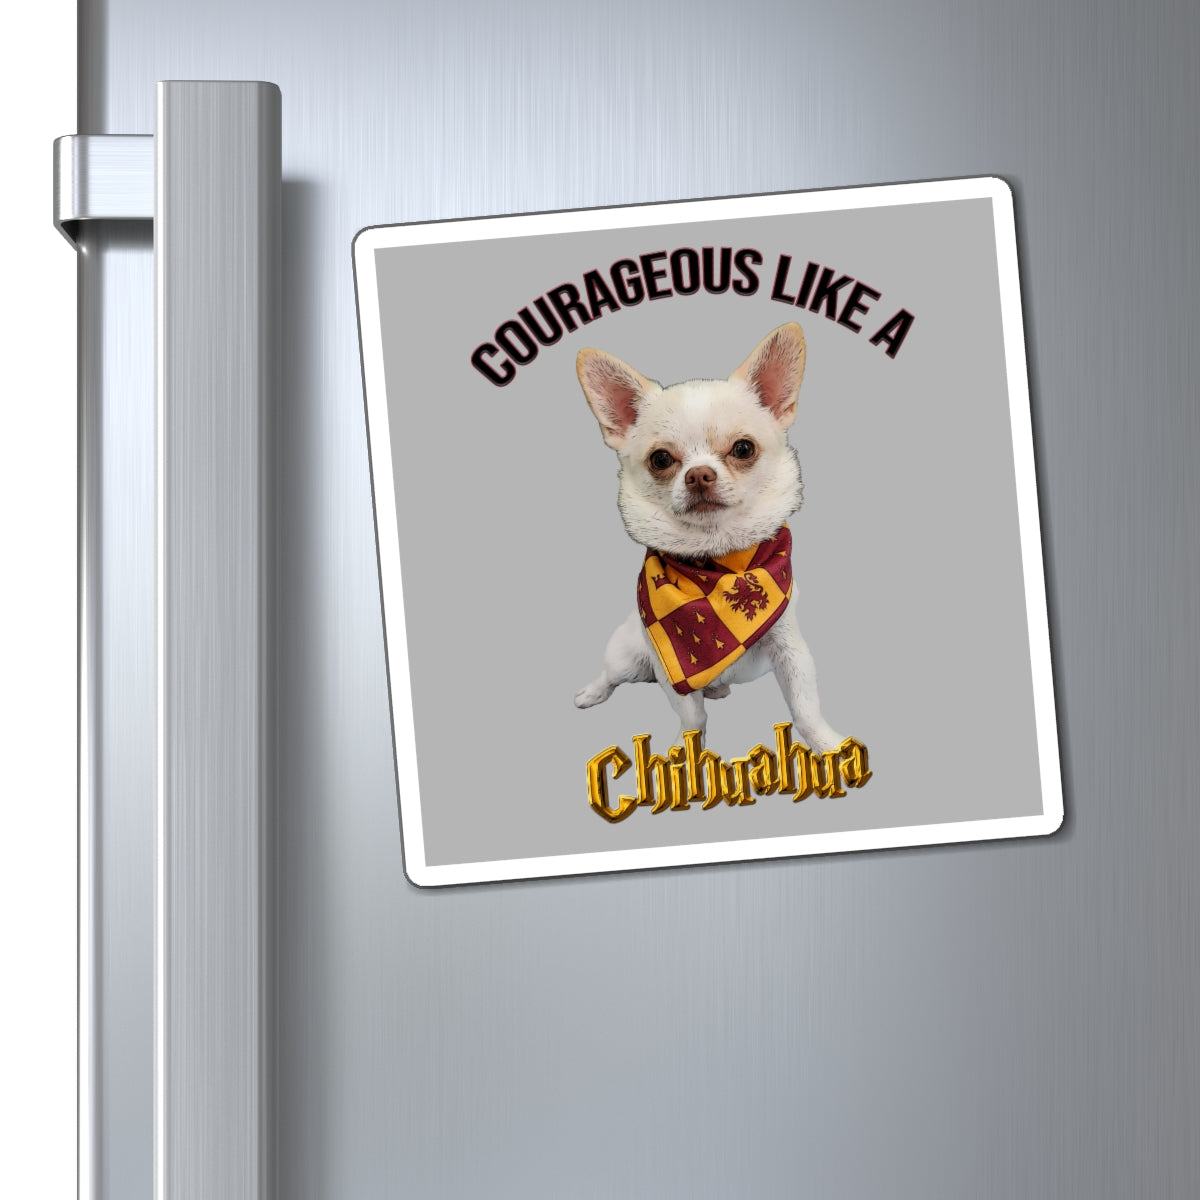 Courageous like a Chihuahua- Gryffindor Harry Potter themed-MagnetsBrainStorm Tees